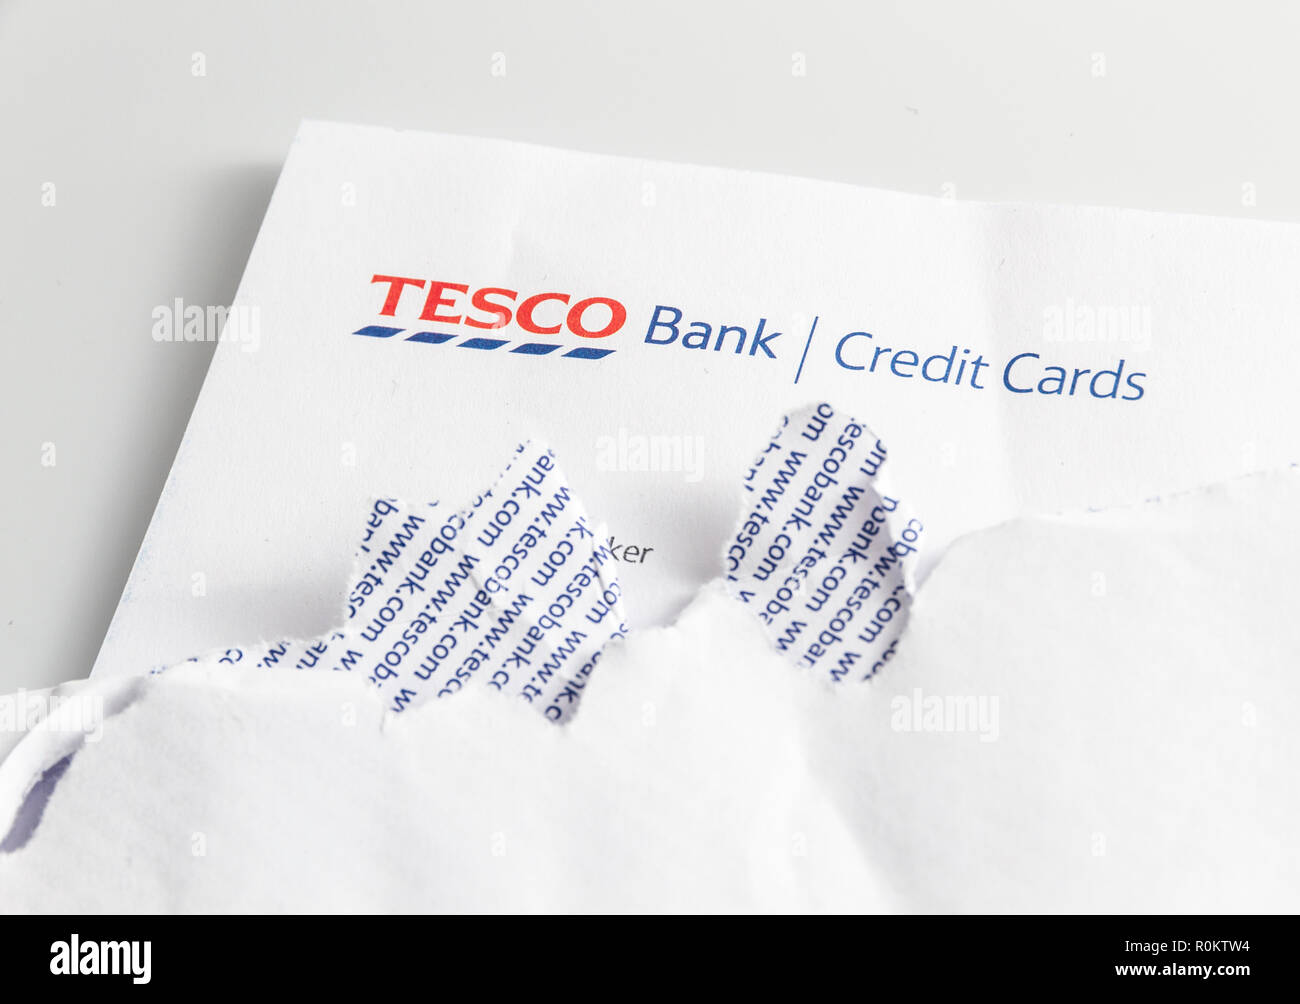 Tesco Bank Credit Card statement on table with ripped open envelope. Stock Photo